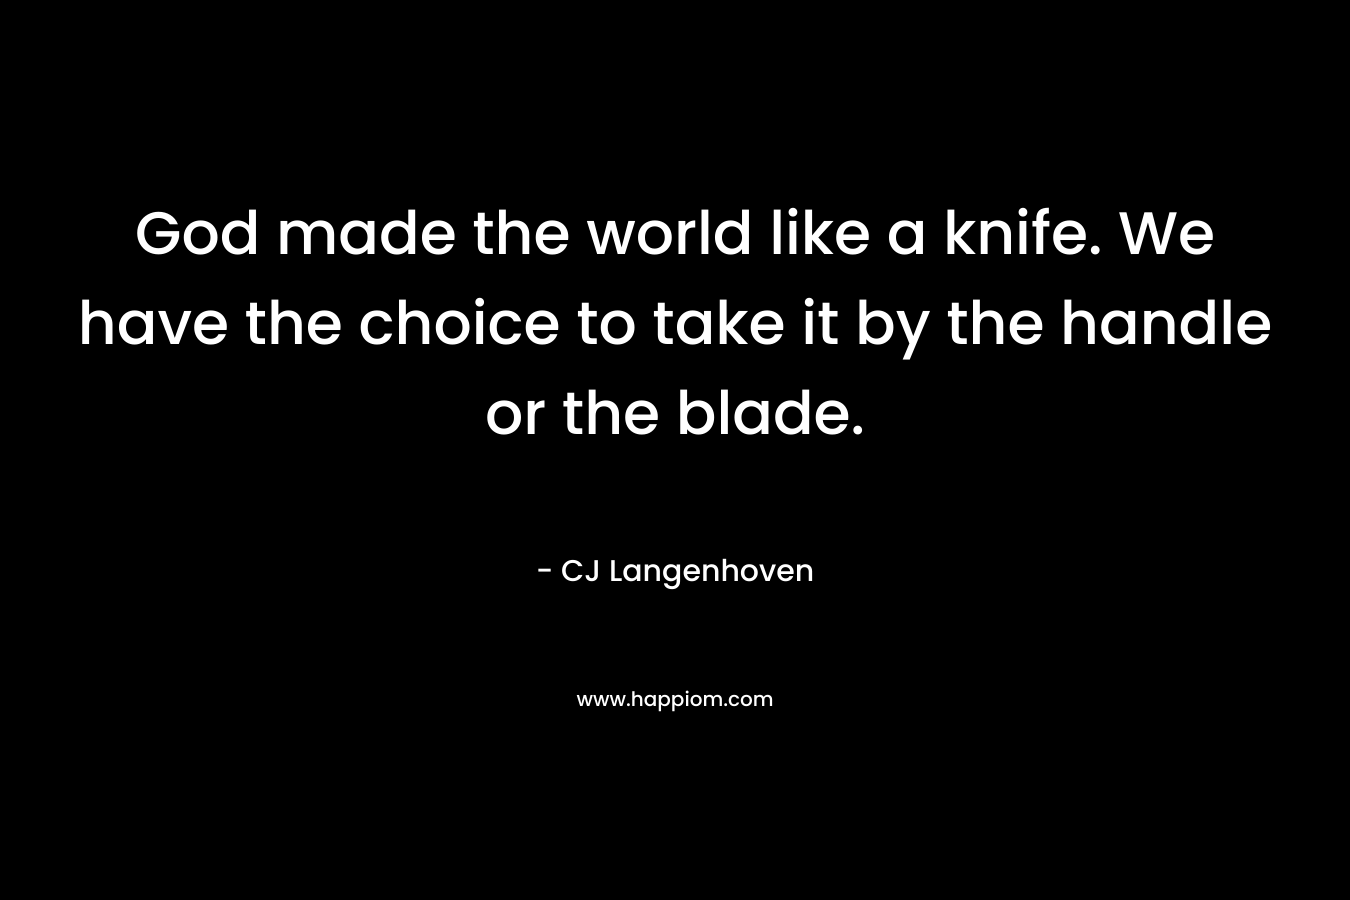 God made the world like a knife. We have the choice to take it by the handle or the blade. – CJ Langenhoven